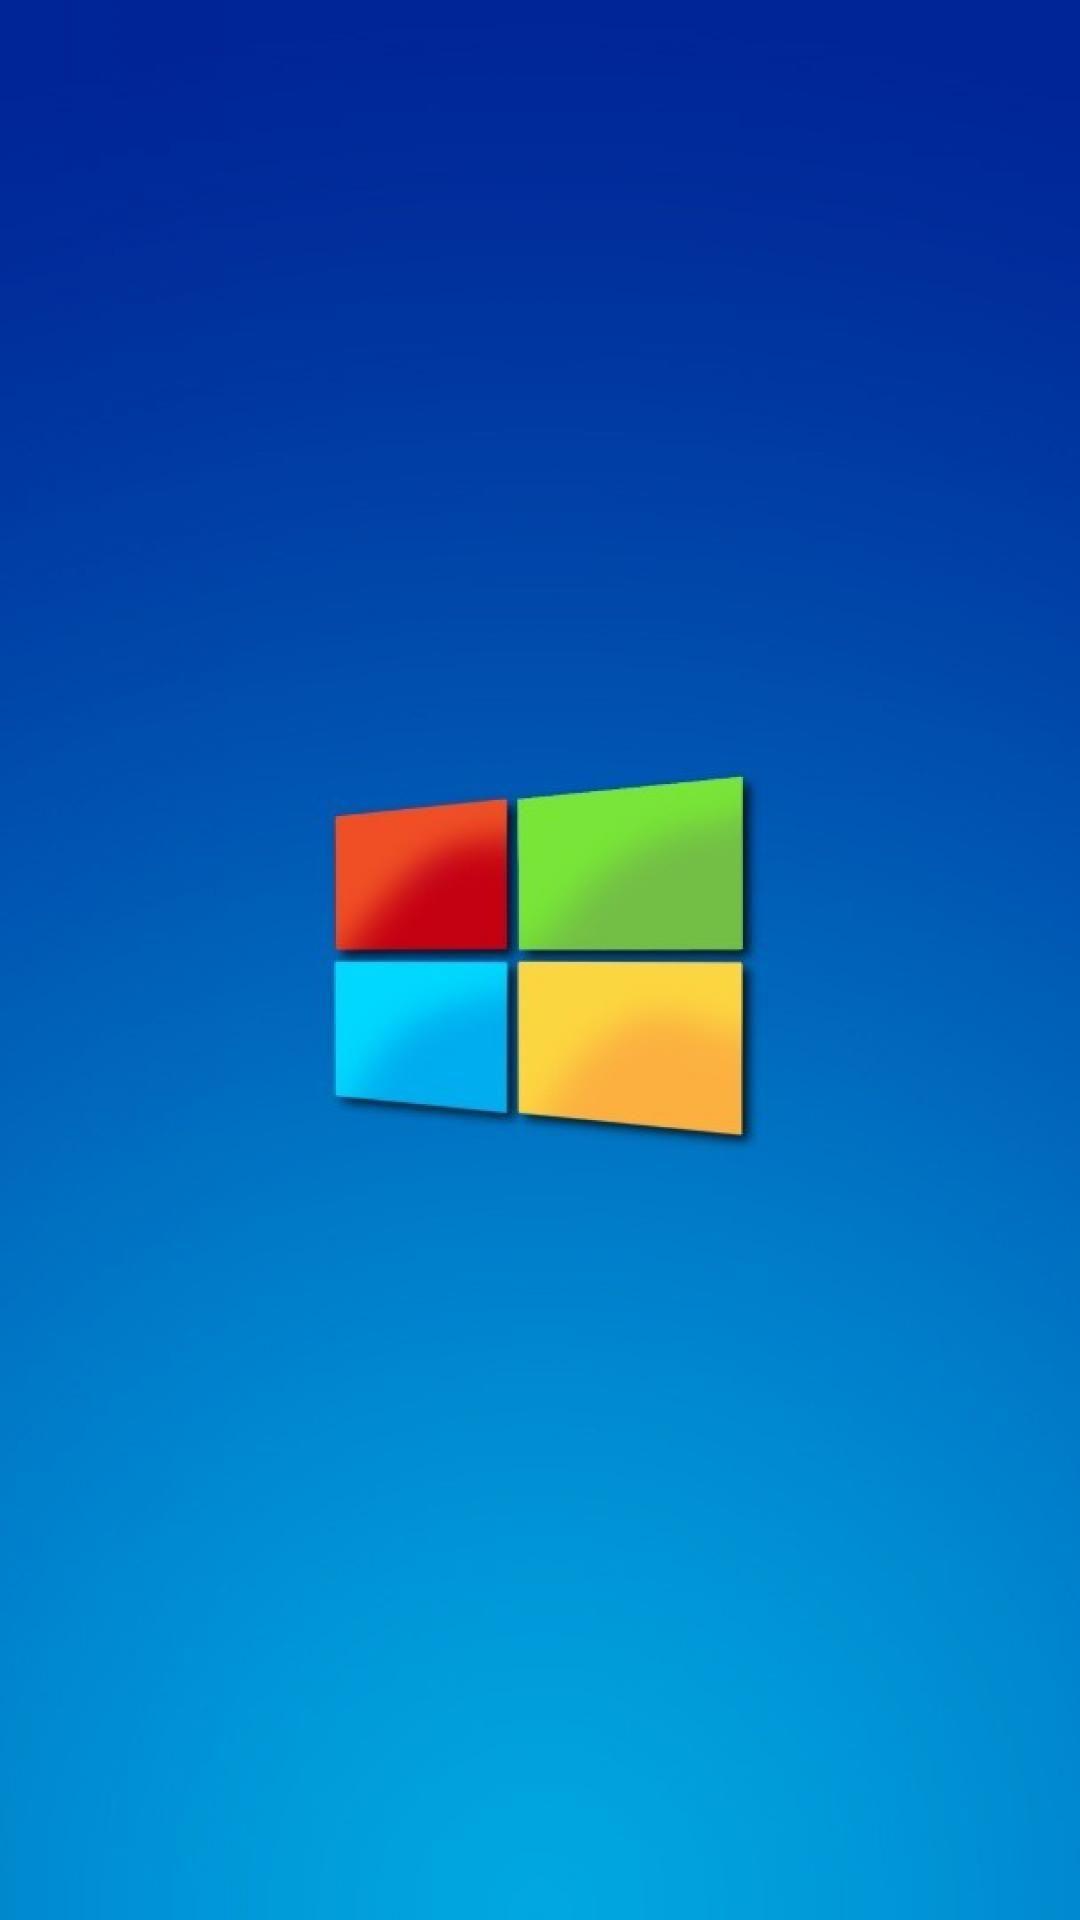 Windows 8 Wallpaper For Mobile Gallery (39 Plus) PIC WPW4014445